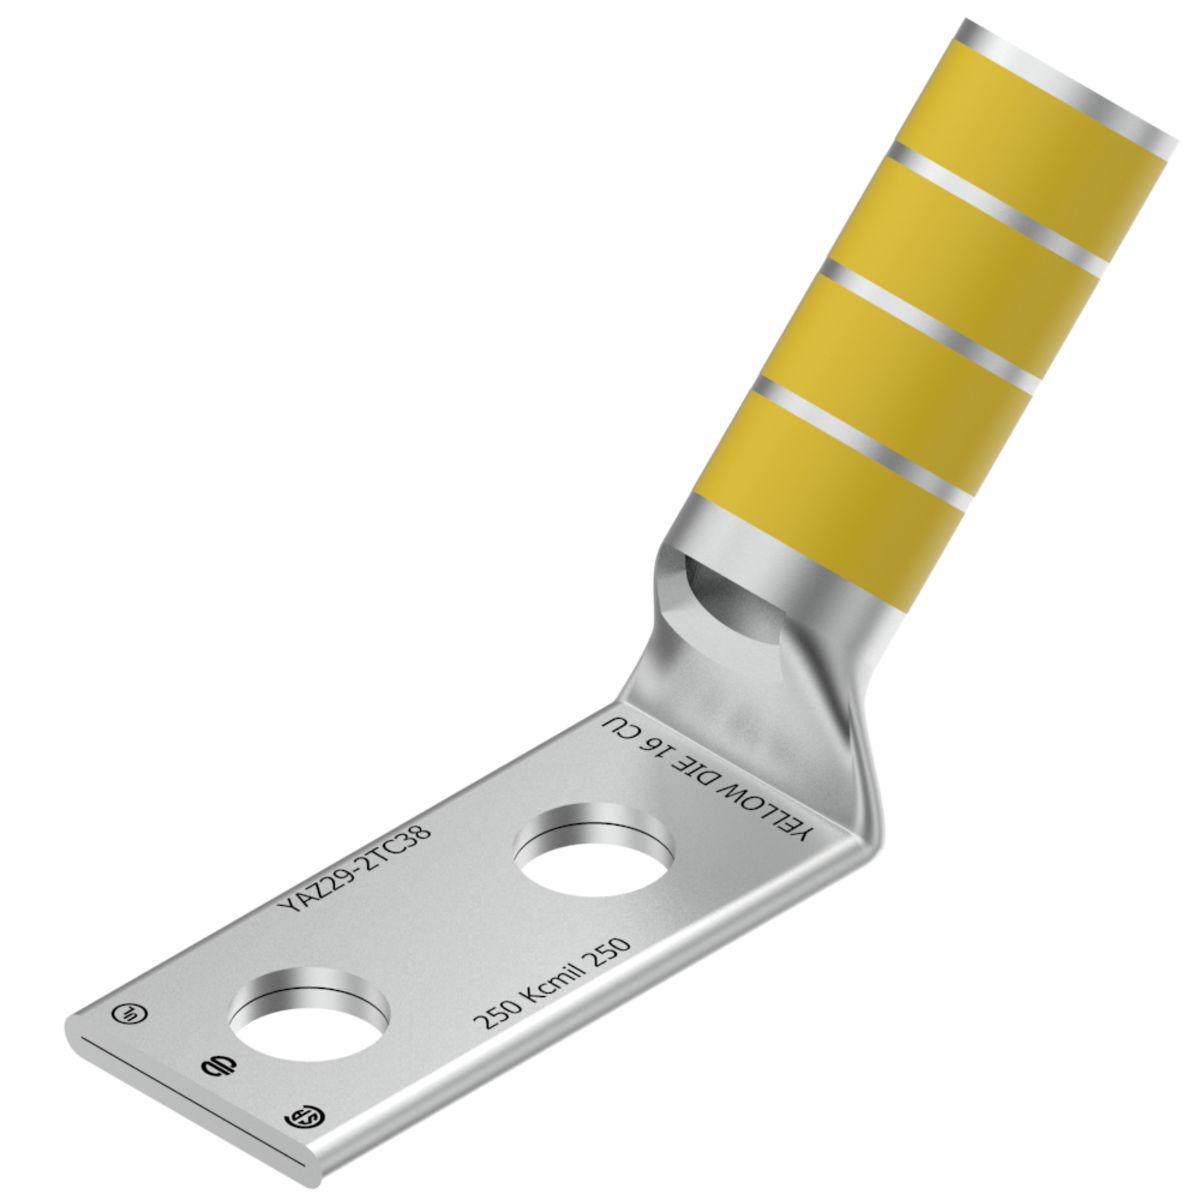 Hubbell YAZ292TC3845 250 kcmil CU, Two Hole, 3/8 Stud Size, 1 Hole Spacing, Long Barrel, Inspection Window Internal Chamfer, Tin Plated, UL/CSA, 90°C, Up to 35kV, Yellow Color Code, 16 Die Index. 